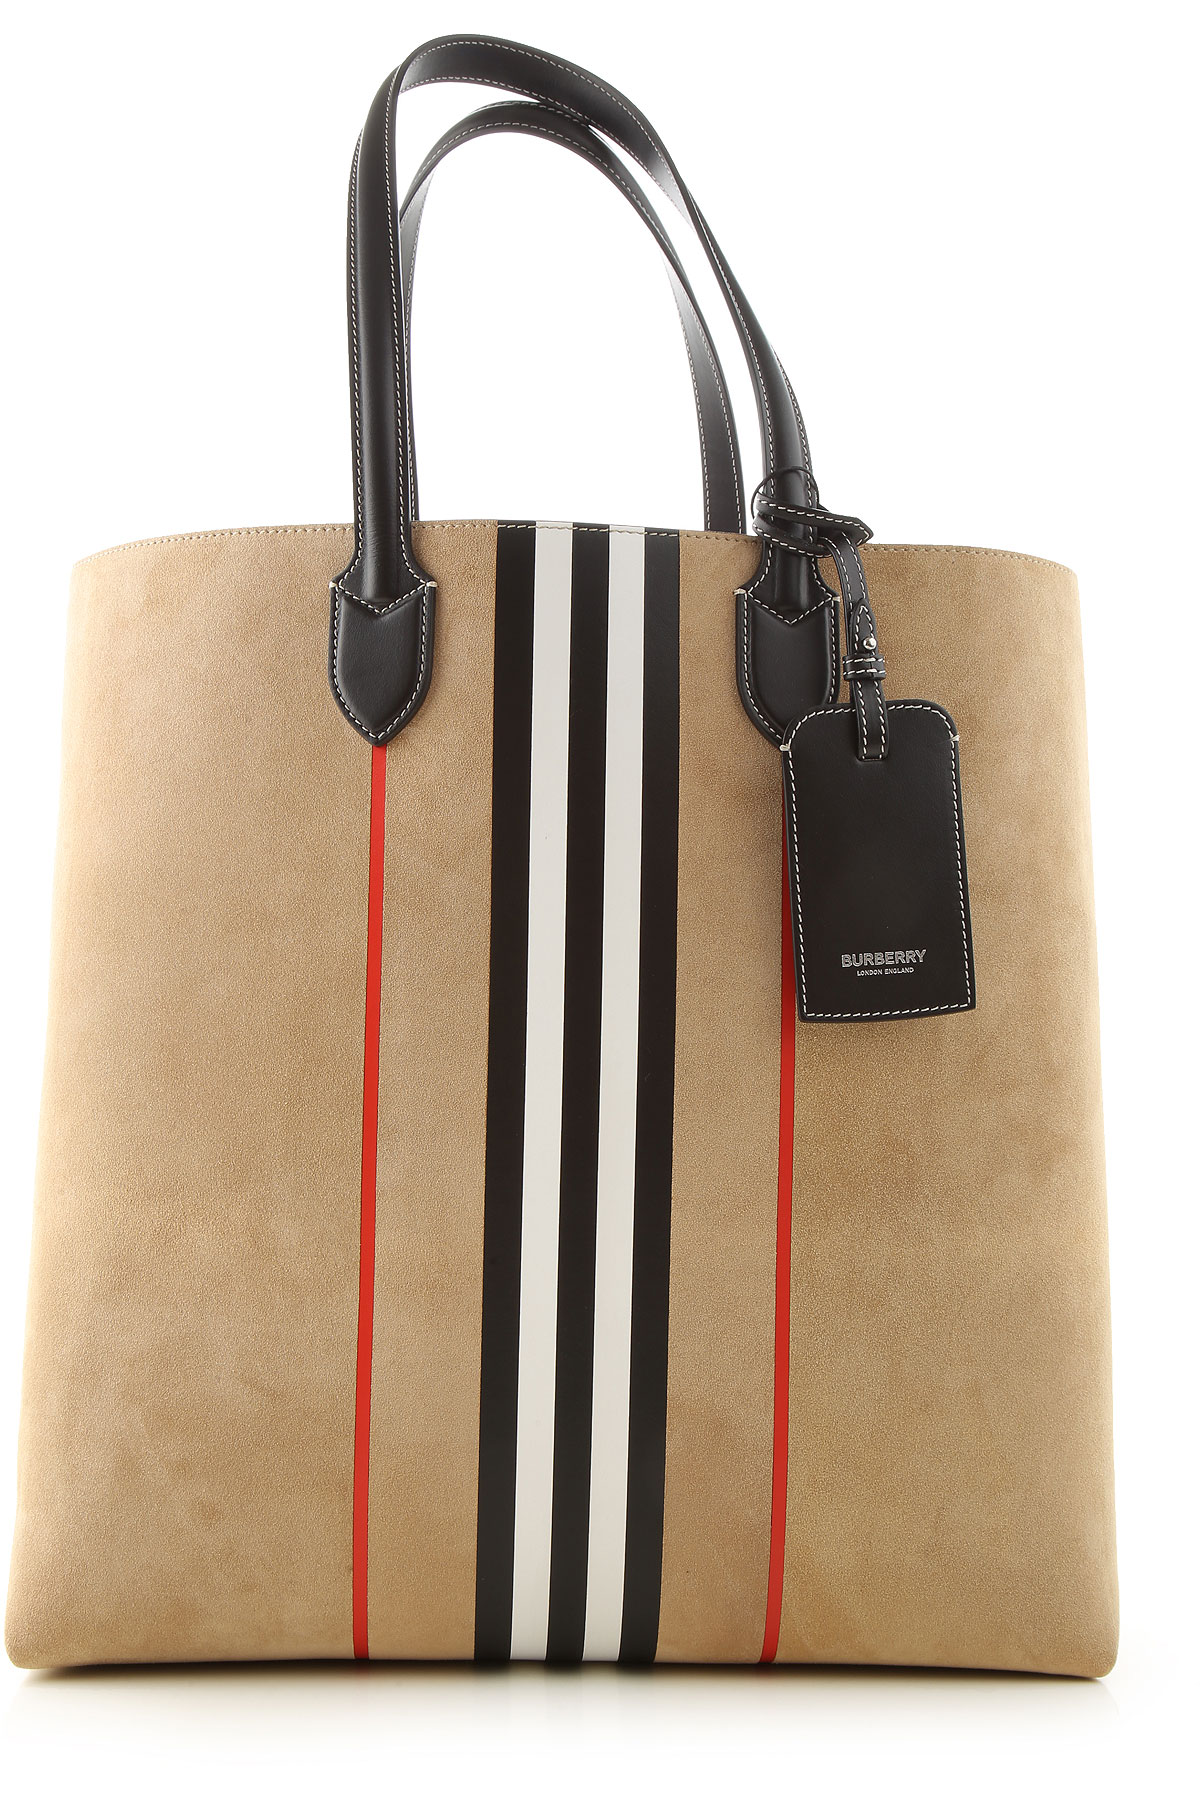 Burberry Tote Bag On Sale, Beige, suede, 2021 from Burberry | IBT Shop